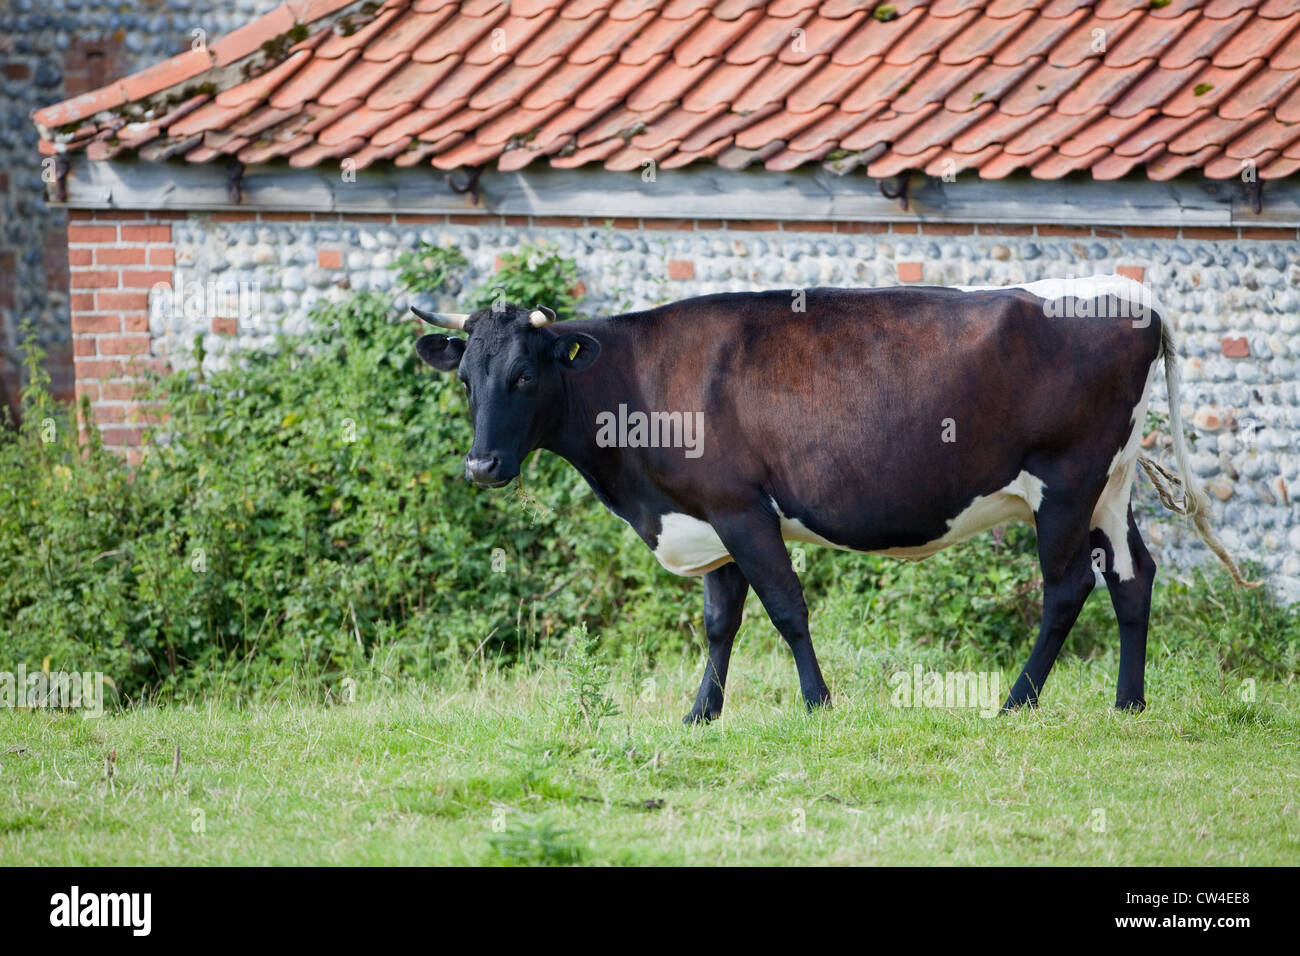 Gloucester Cattle (Bos taurus). Cow. Rare dairy breed. Stock Photo